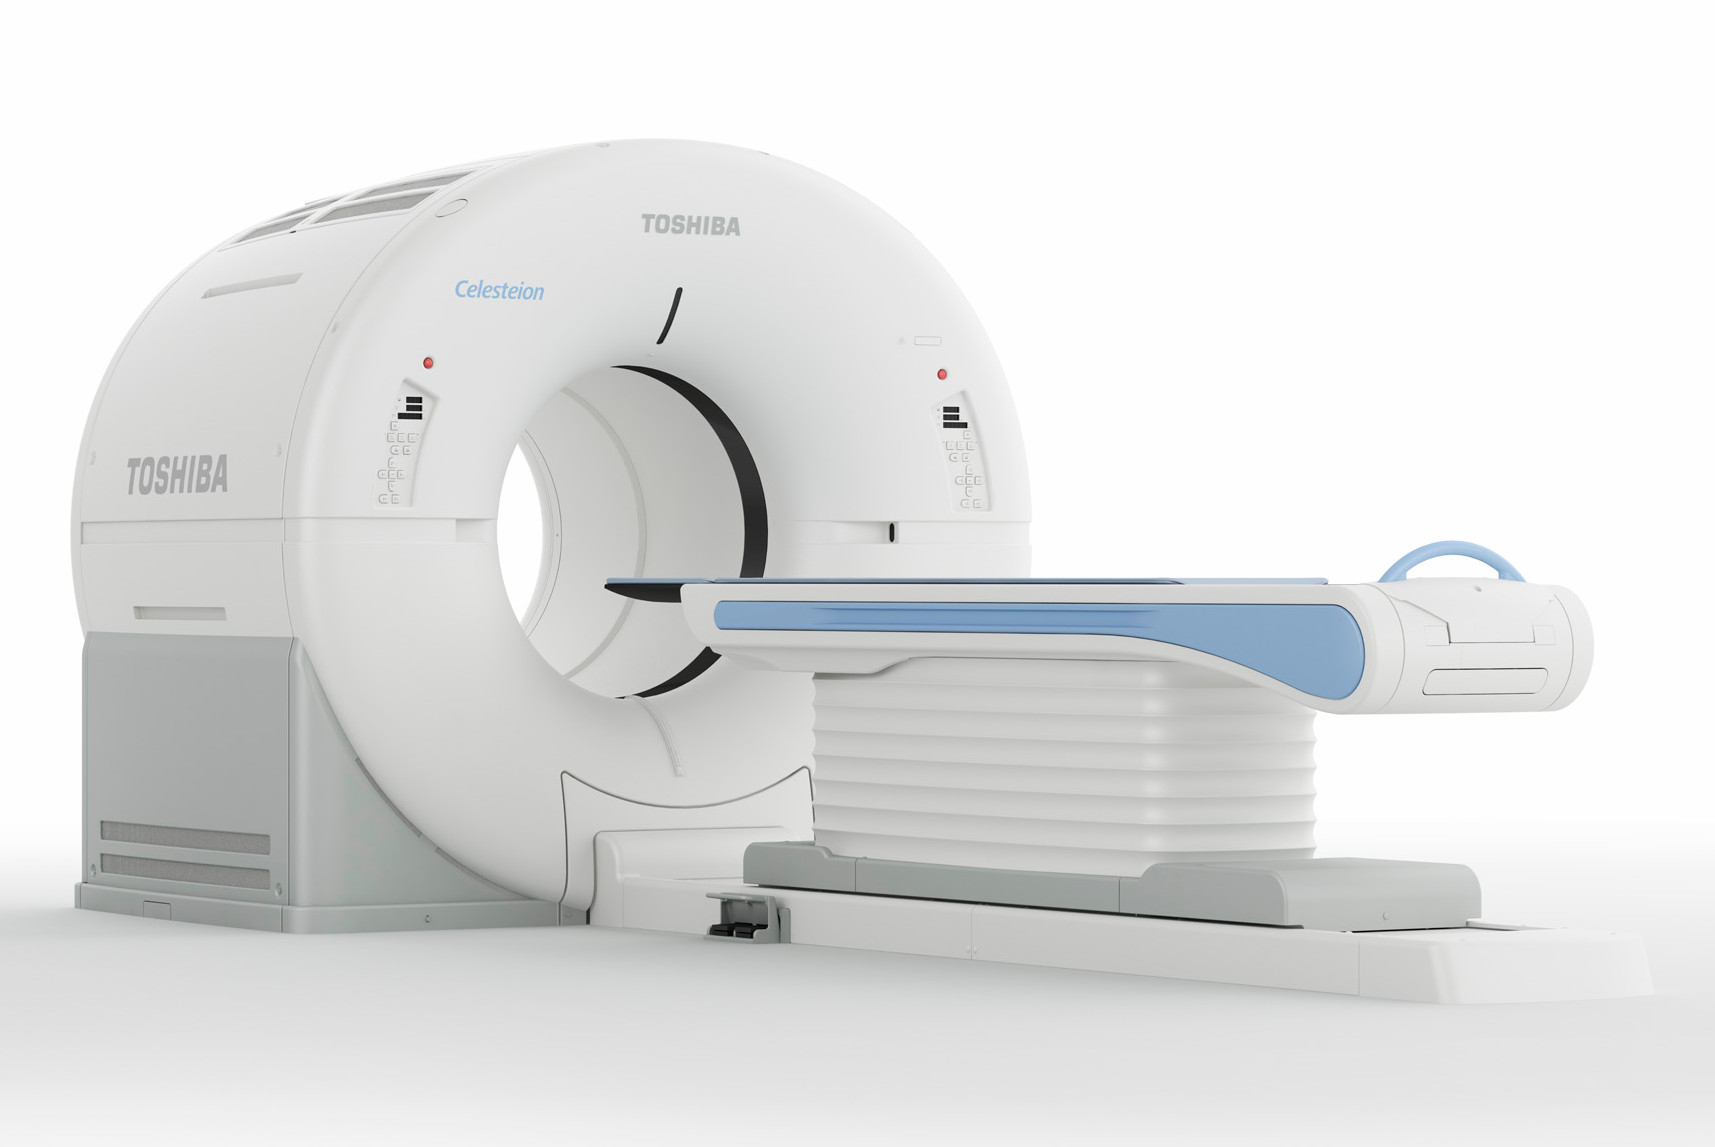 Largest Imaging Center in the U.S. Installs First Toshiba Celesteion PET/CT System | Canon USA